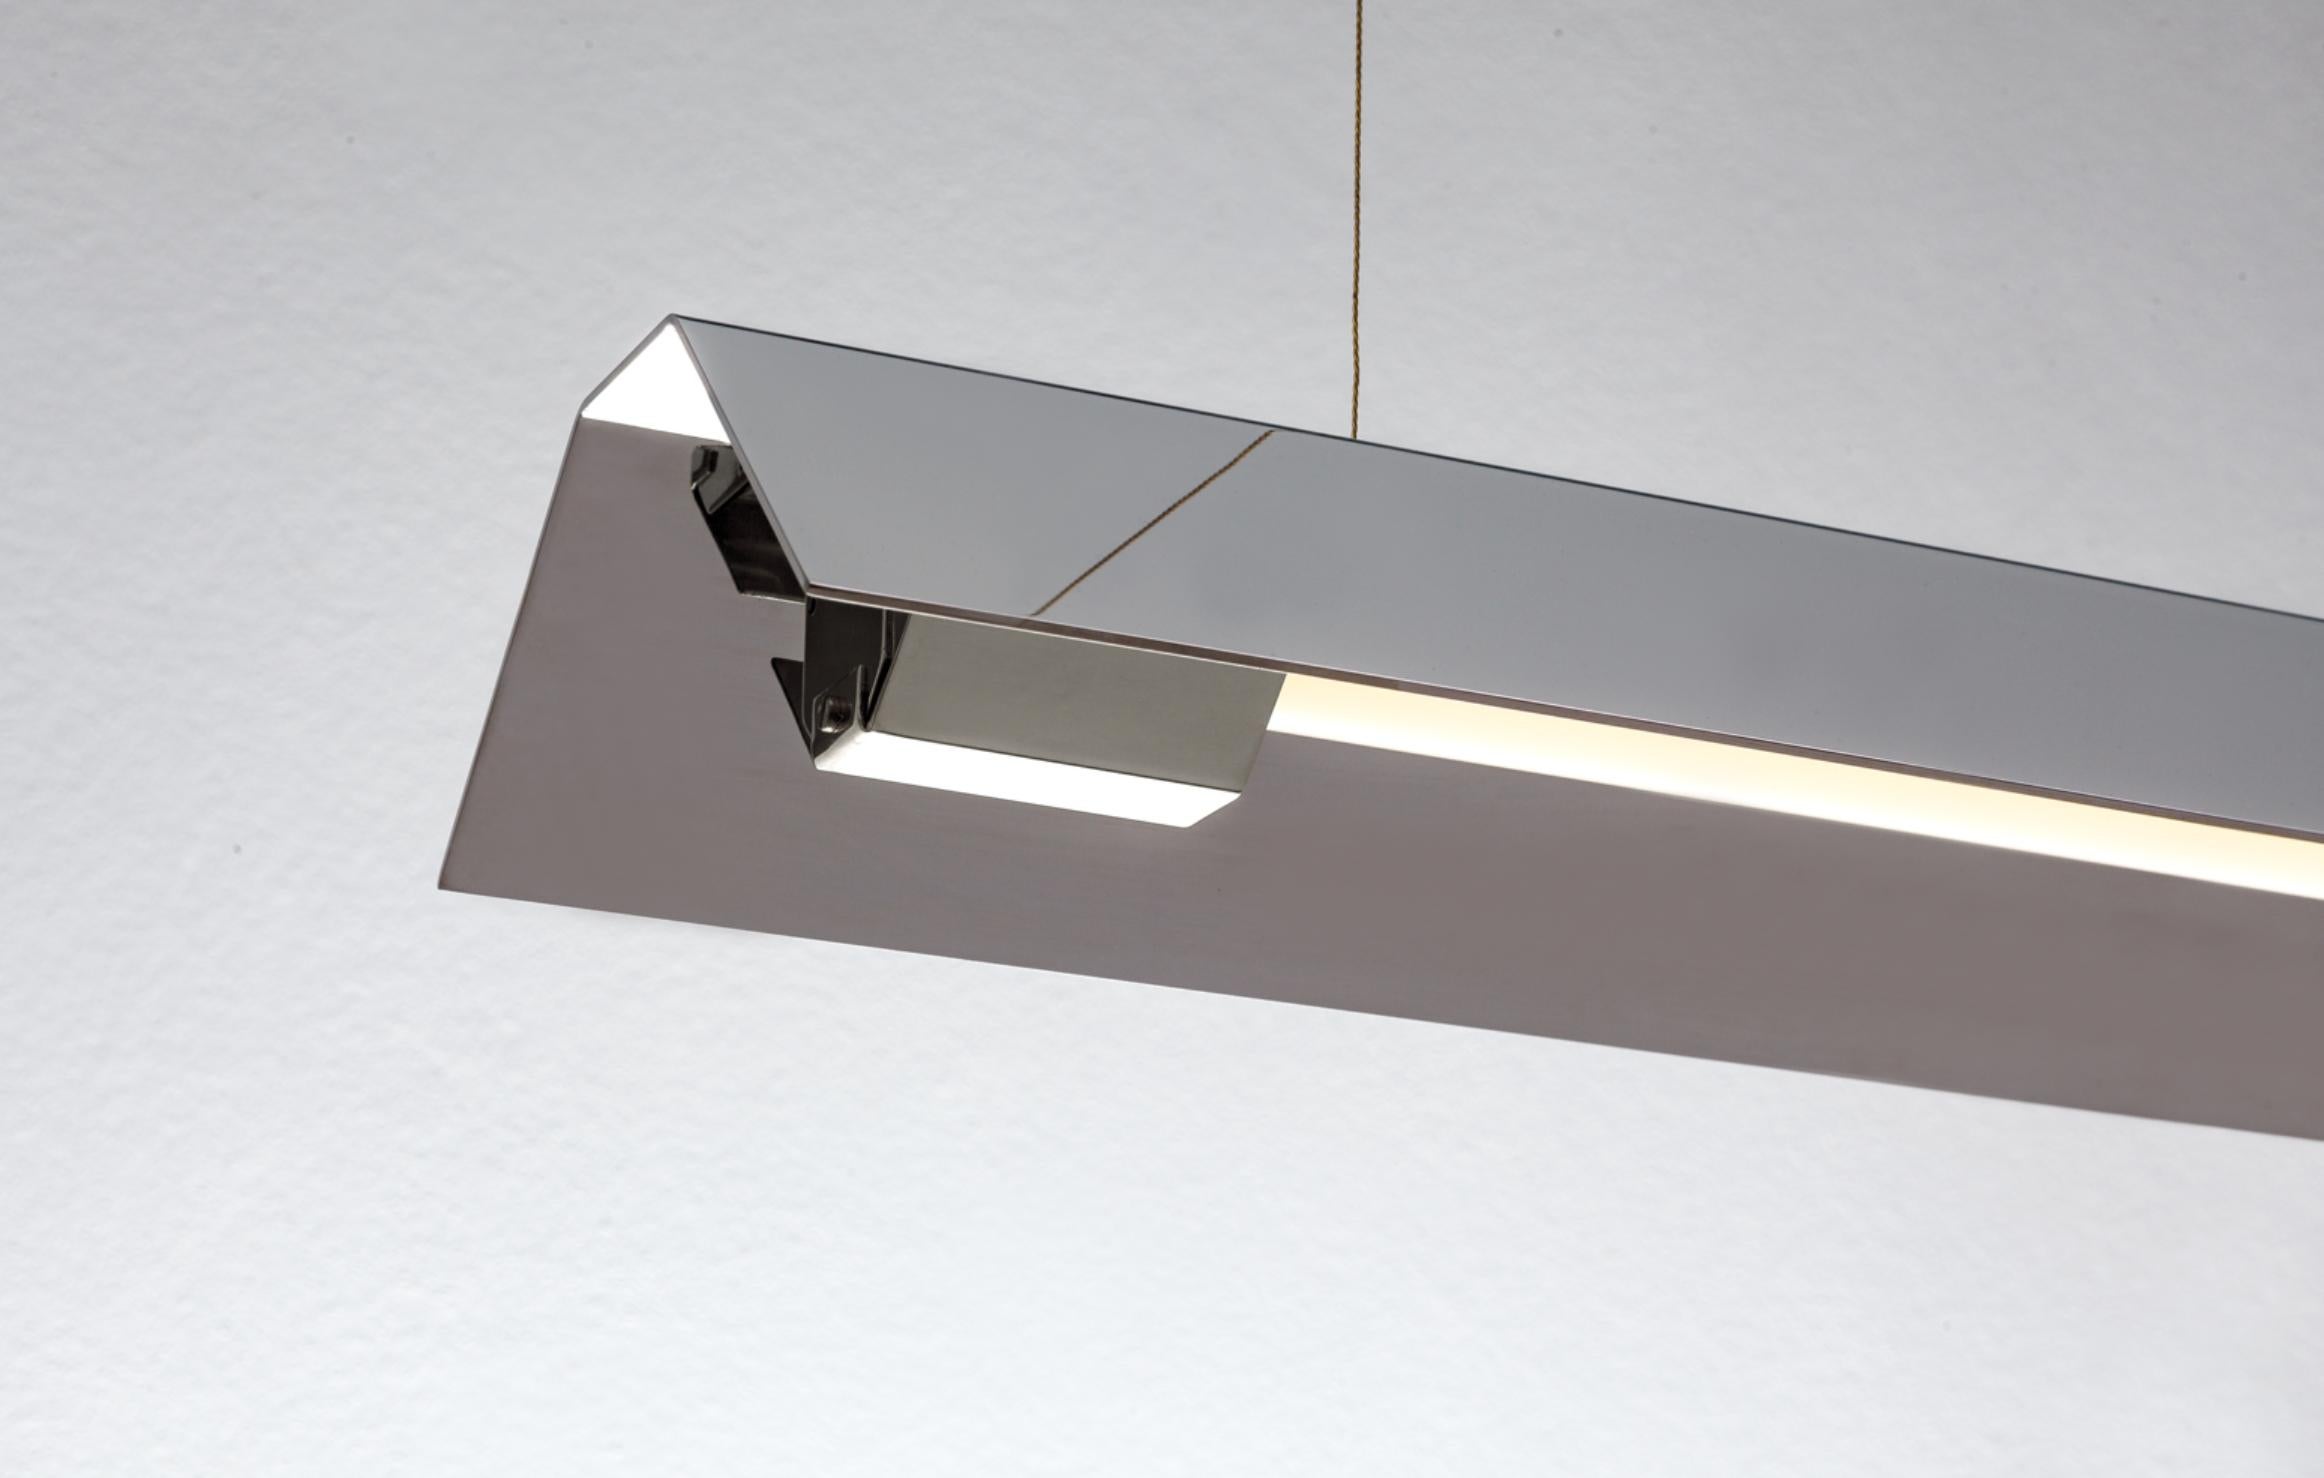 Small Misalliance inox suspended light by Lexavala
Dimensions: D 16 x W 70 x H 8 cm
Materials: Stainless steel.

There are two lenghts of socket covers, extending over the LED. Two short are to be found in Suspended and Surface, and one long in